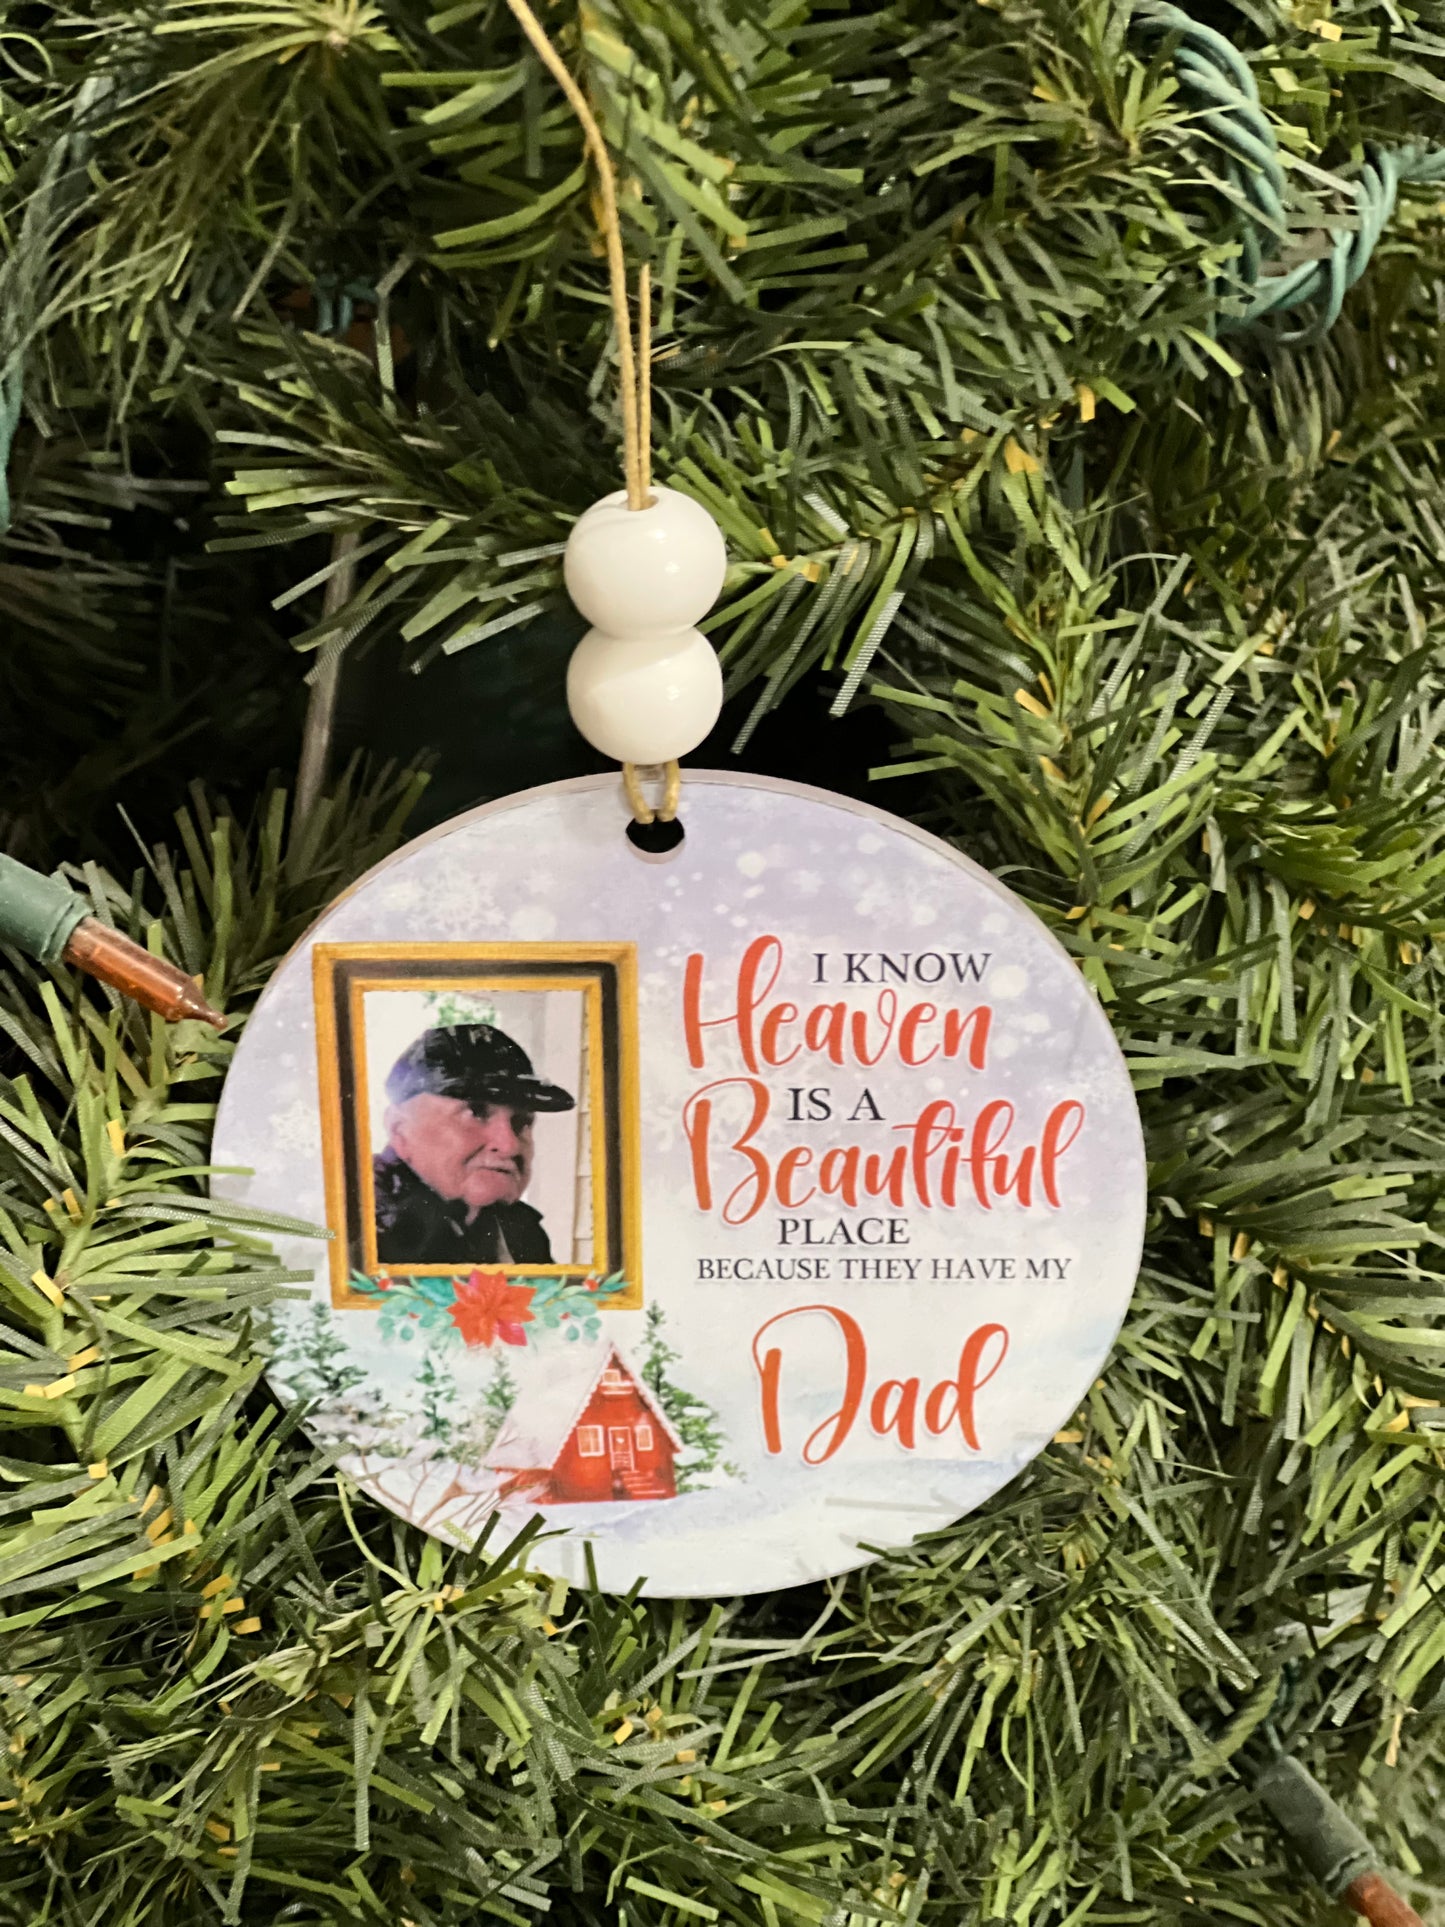 I know Heaven is a Beautiful place picture ornament